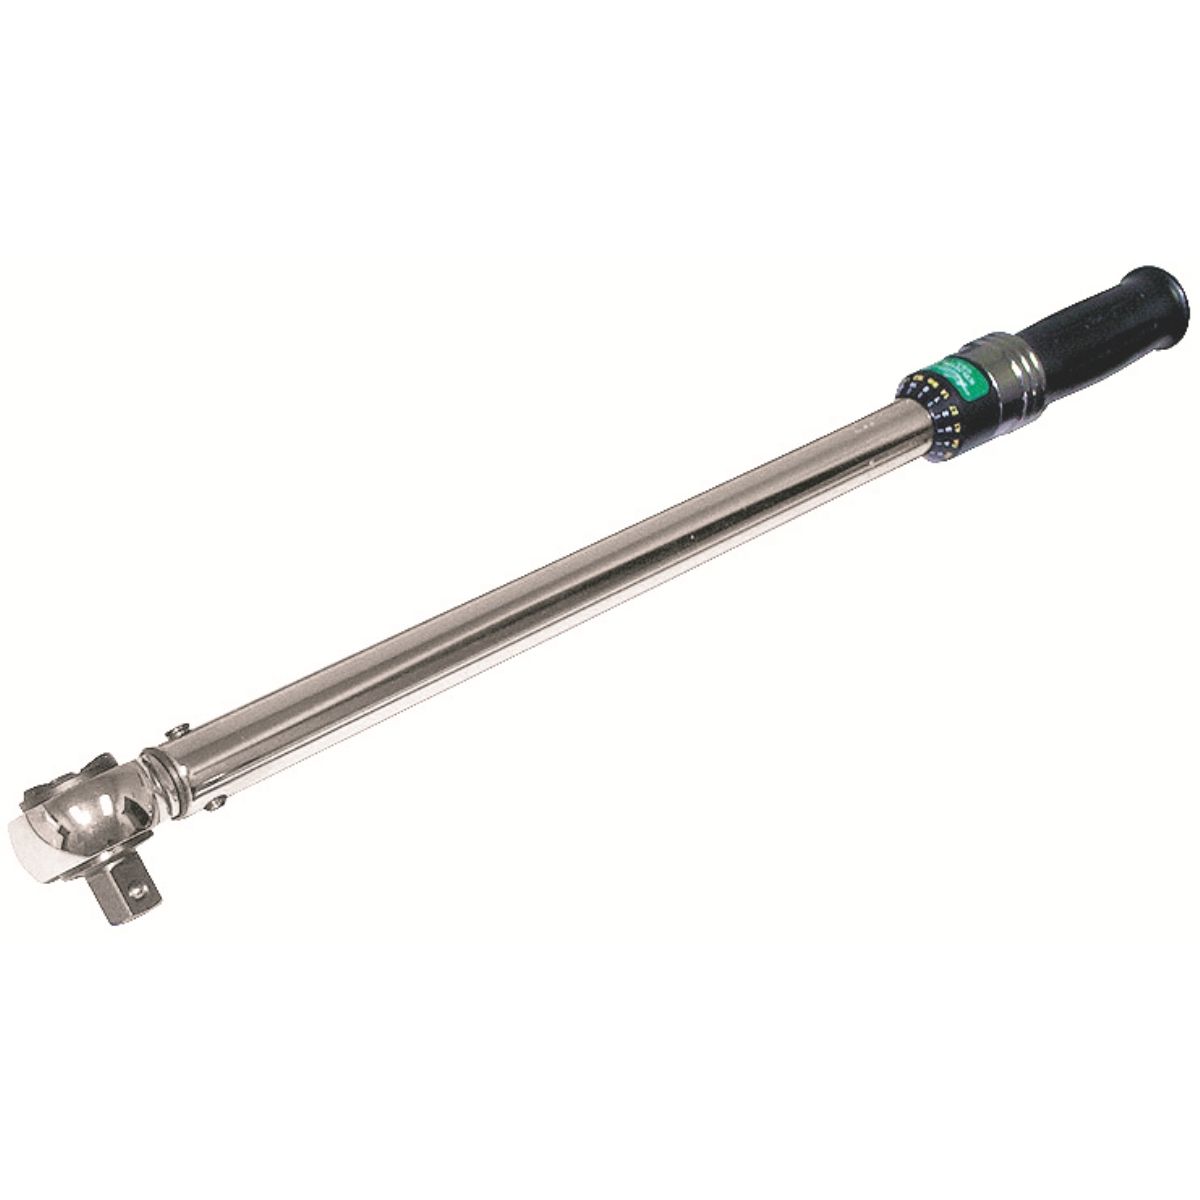 TORQUE WRENCH 1/2" 25-250 FT/LB